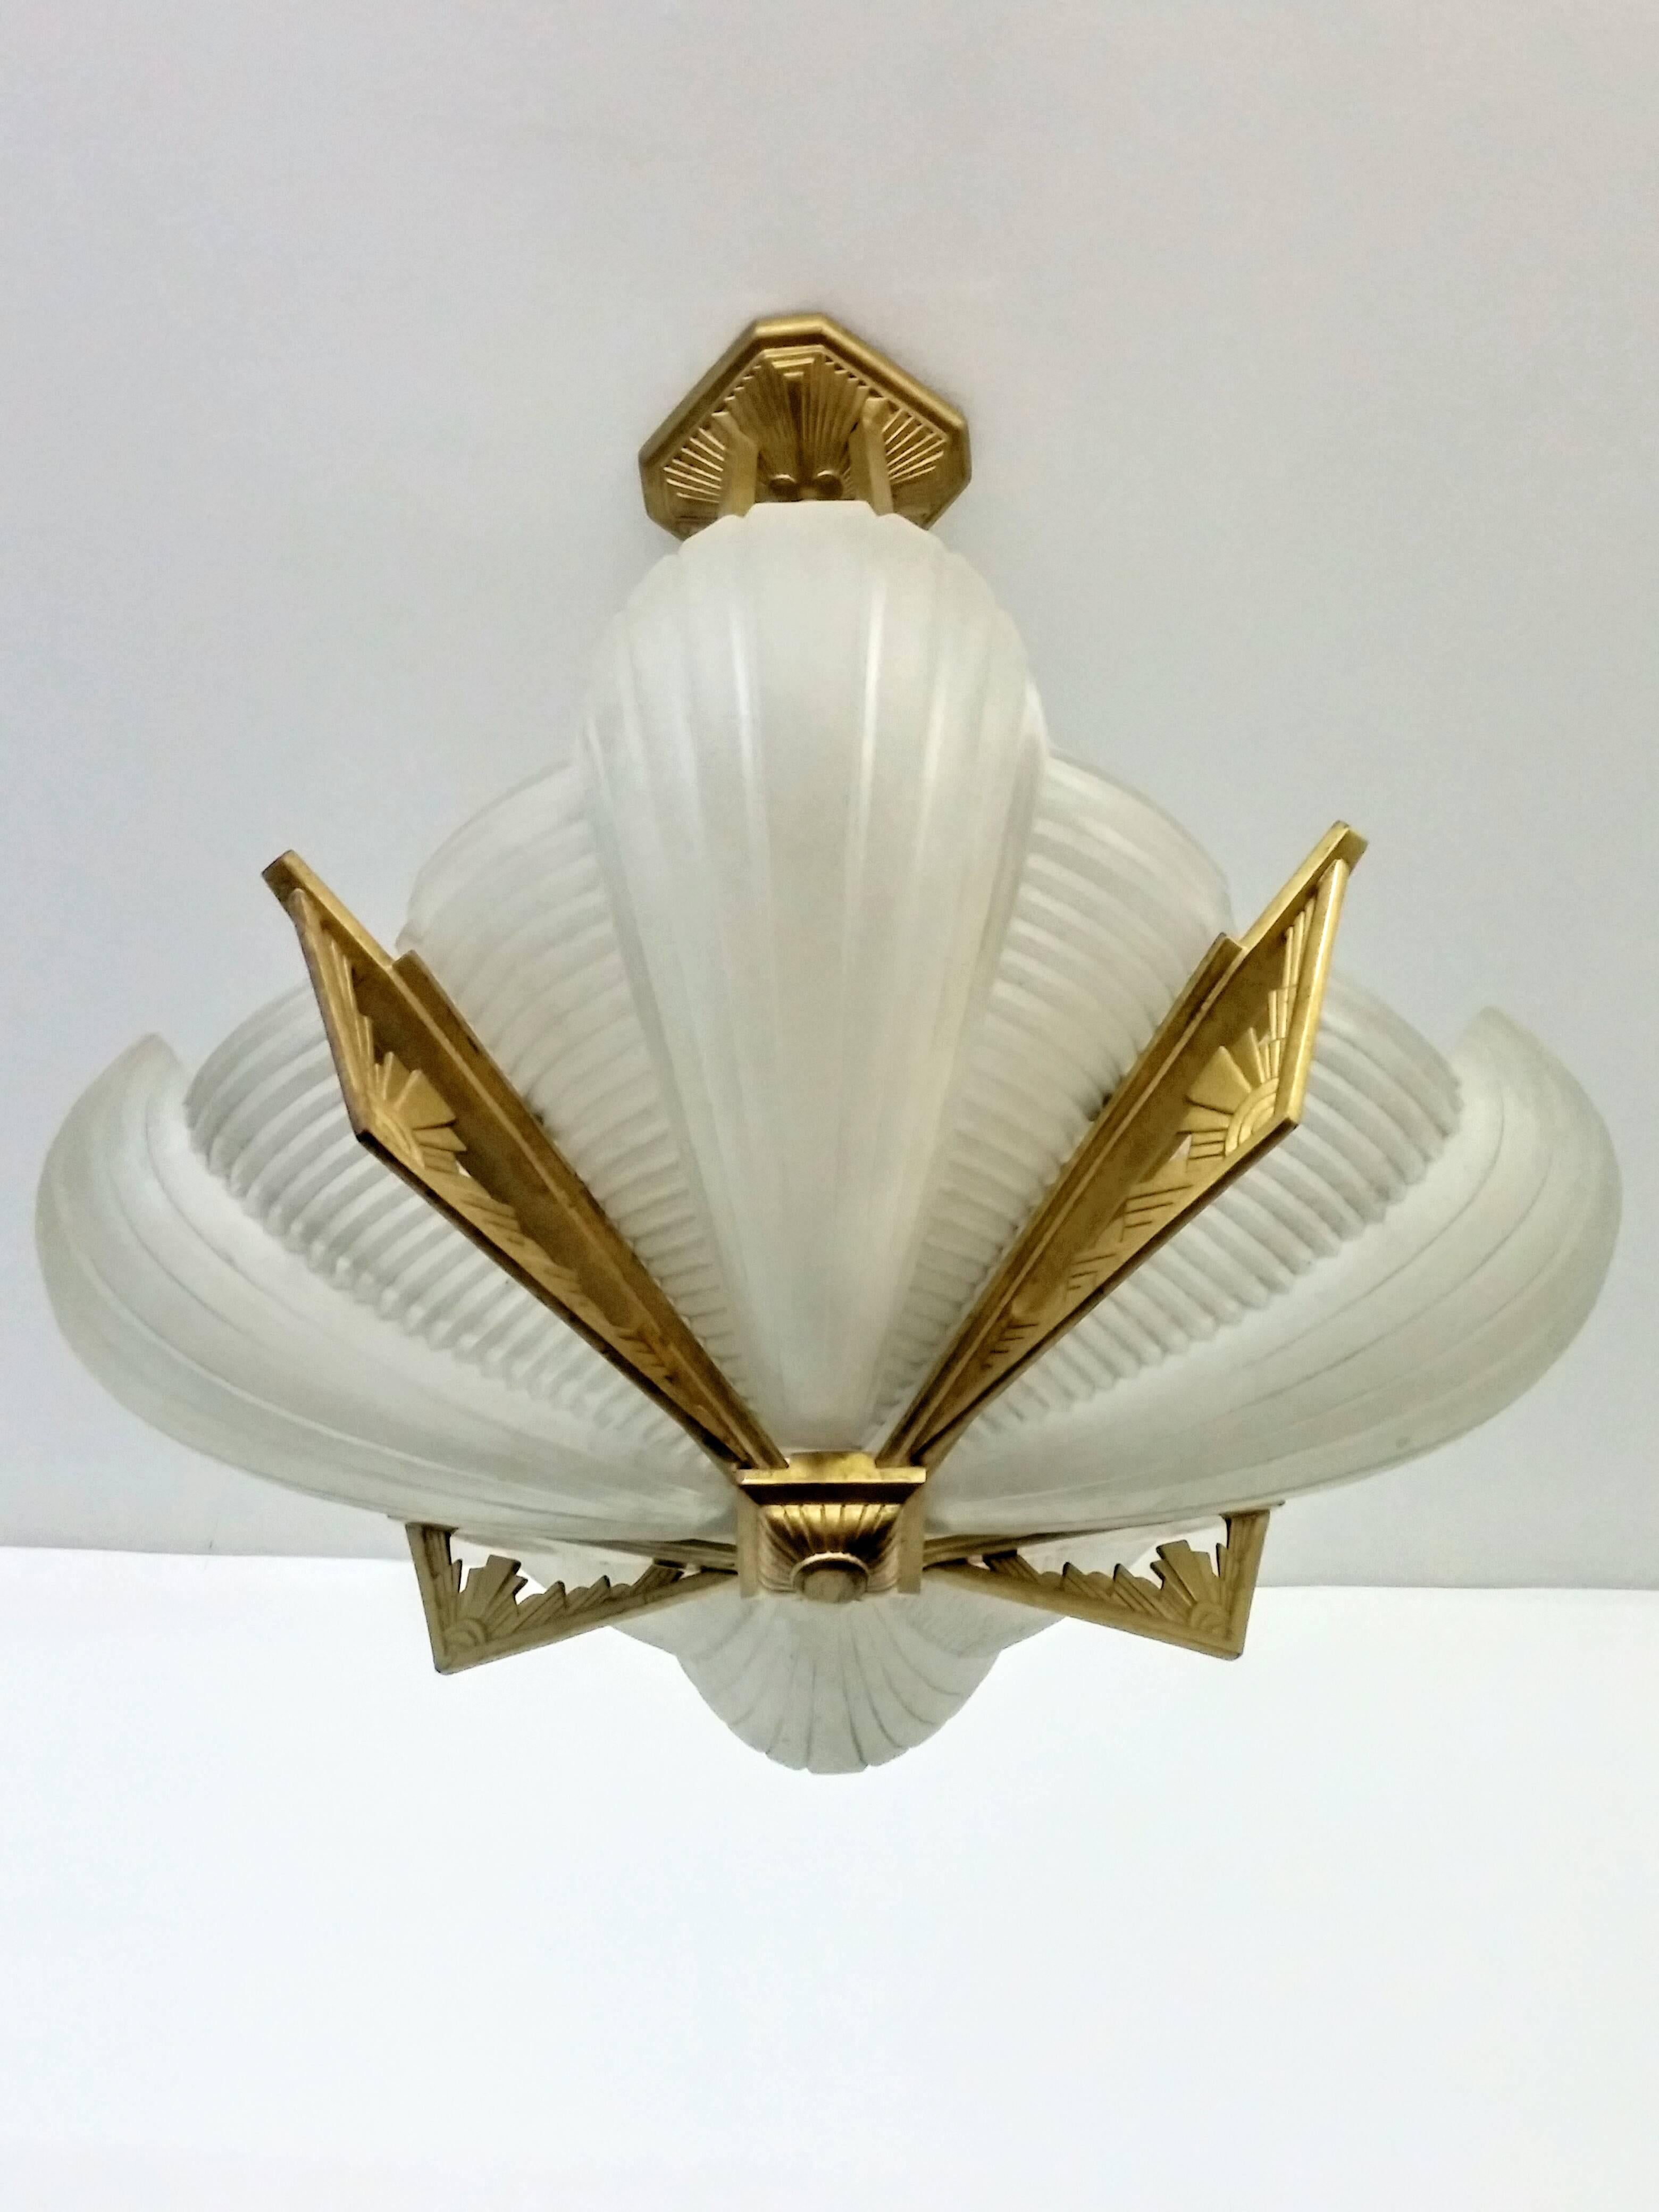 A French Art Deco pendant chandelier by the French artist 